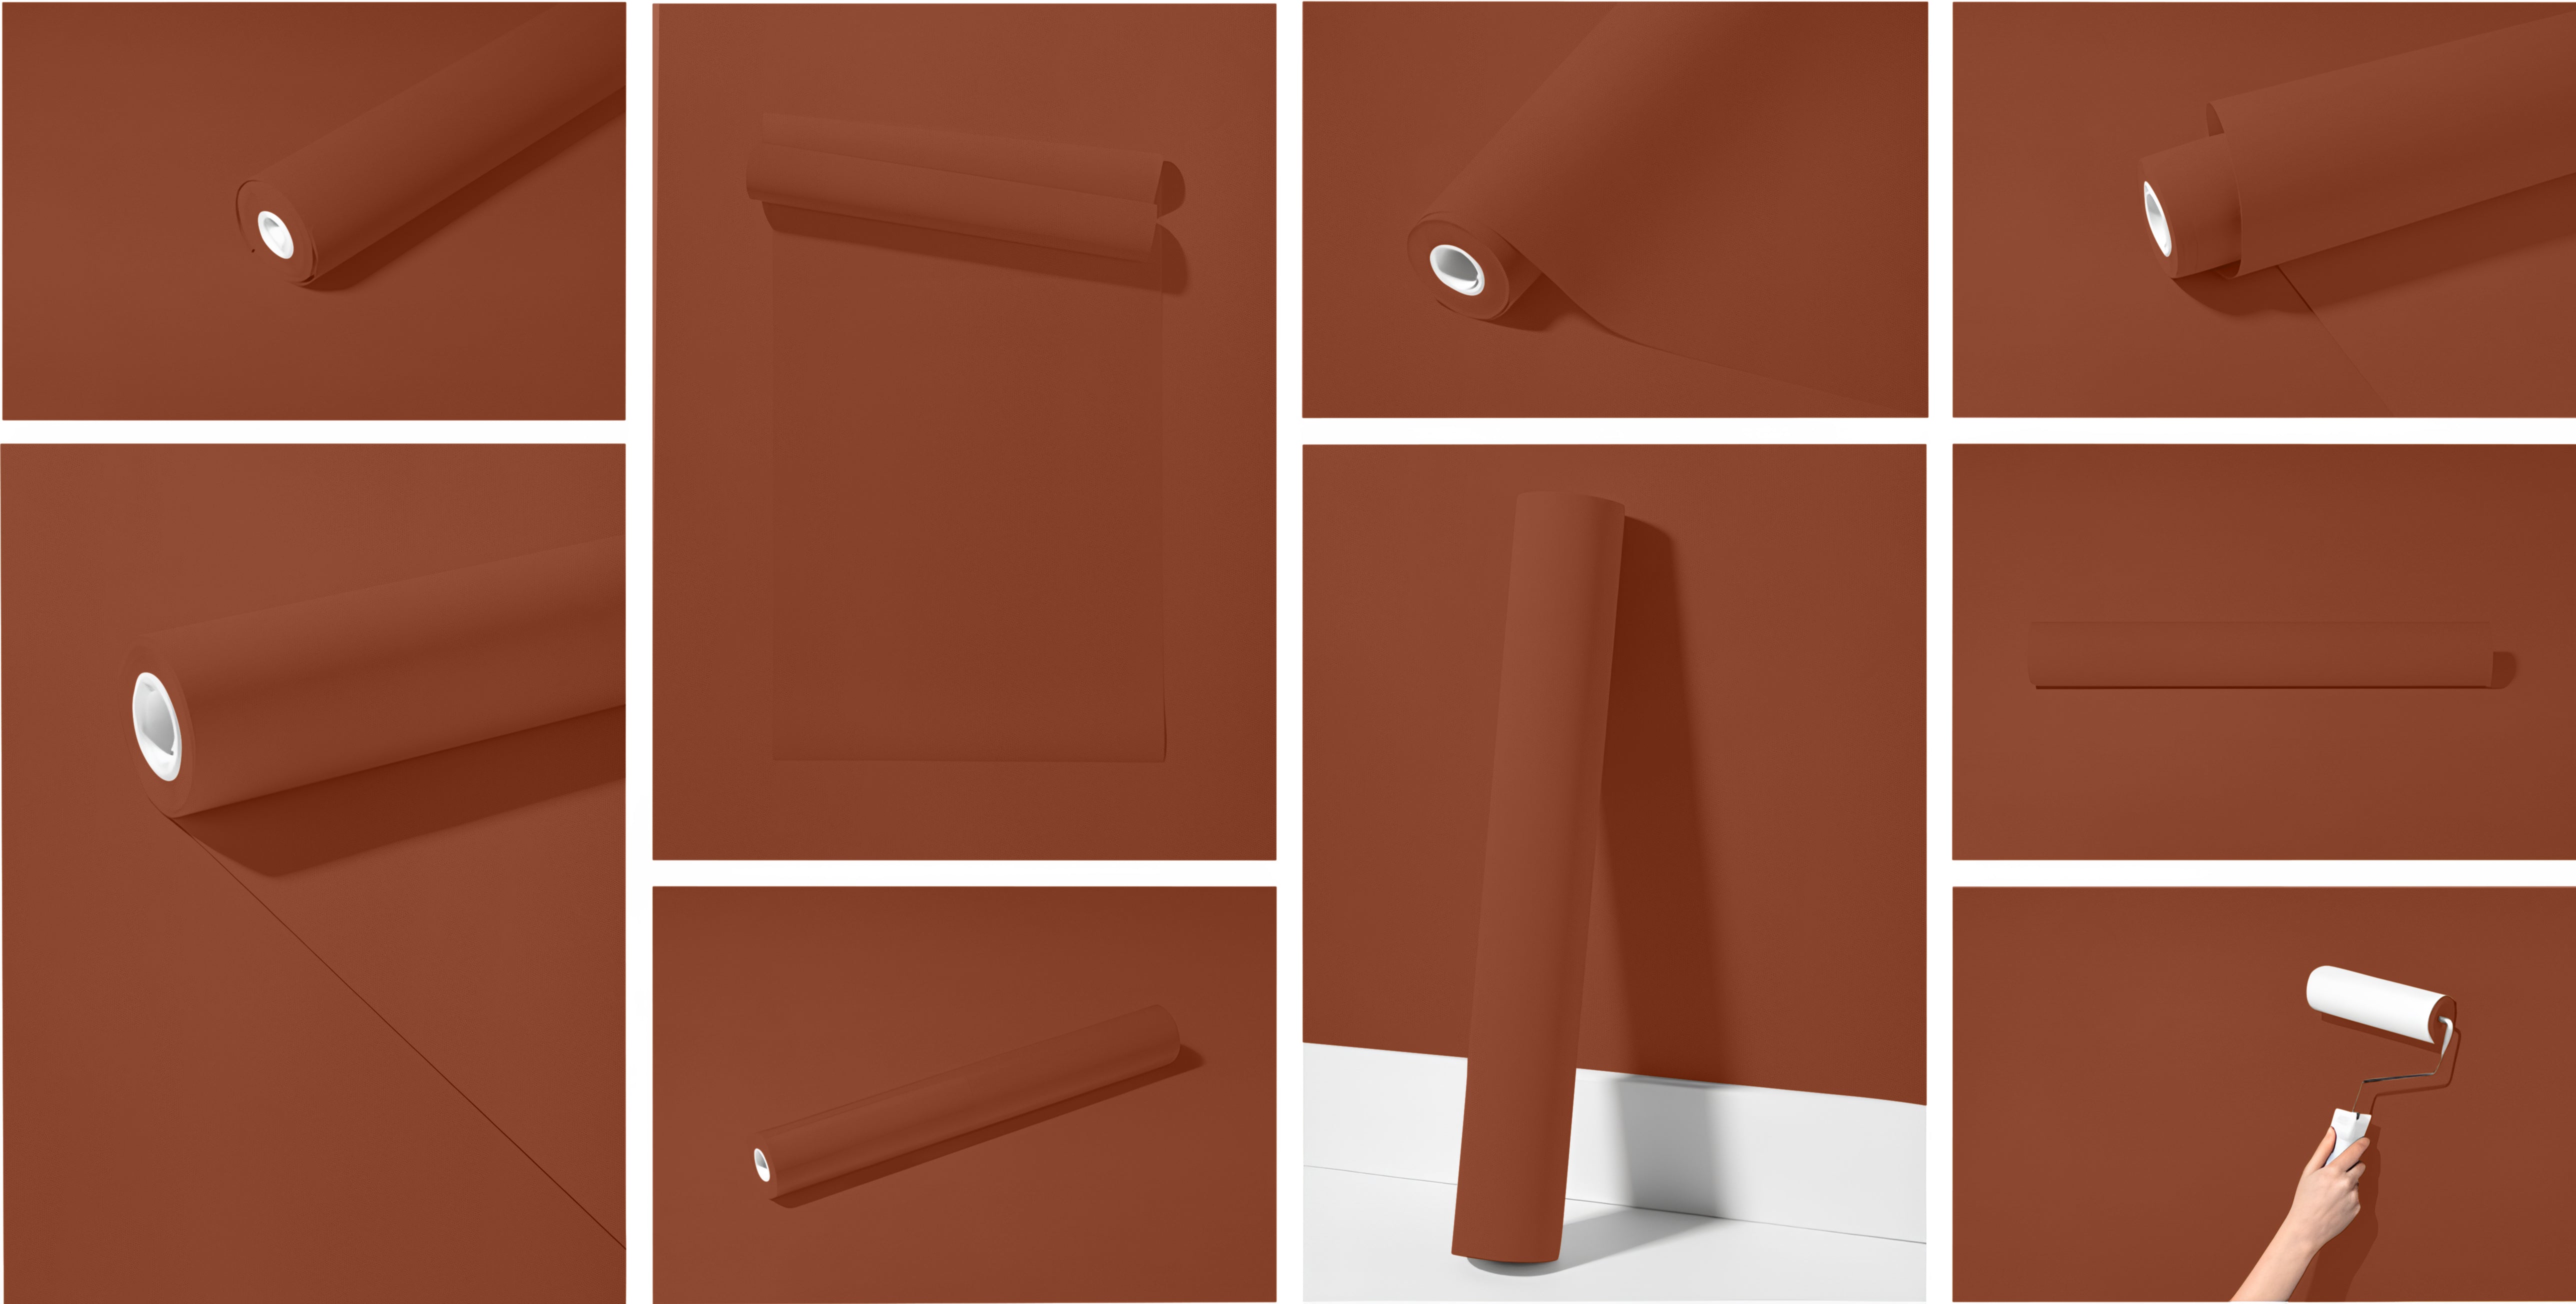 Peel & Stick Removable Re-usable Paint - Color RAL 8004 Copper Brown - offRAL™ - RALRAW LLC, USA